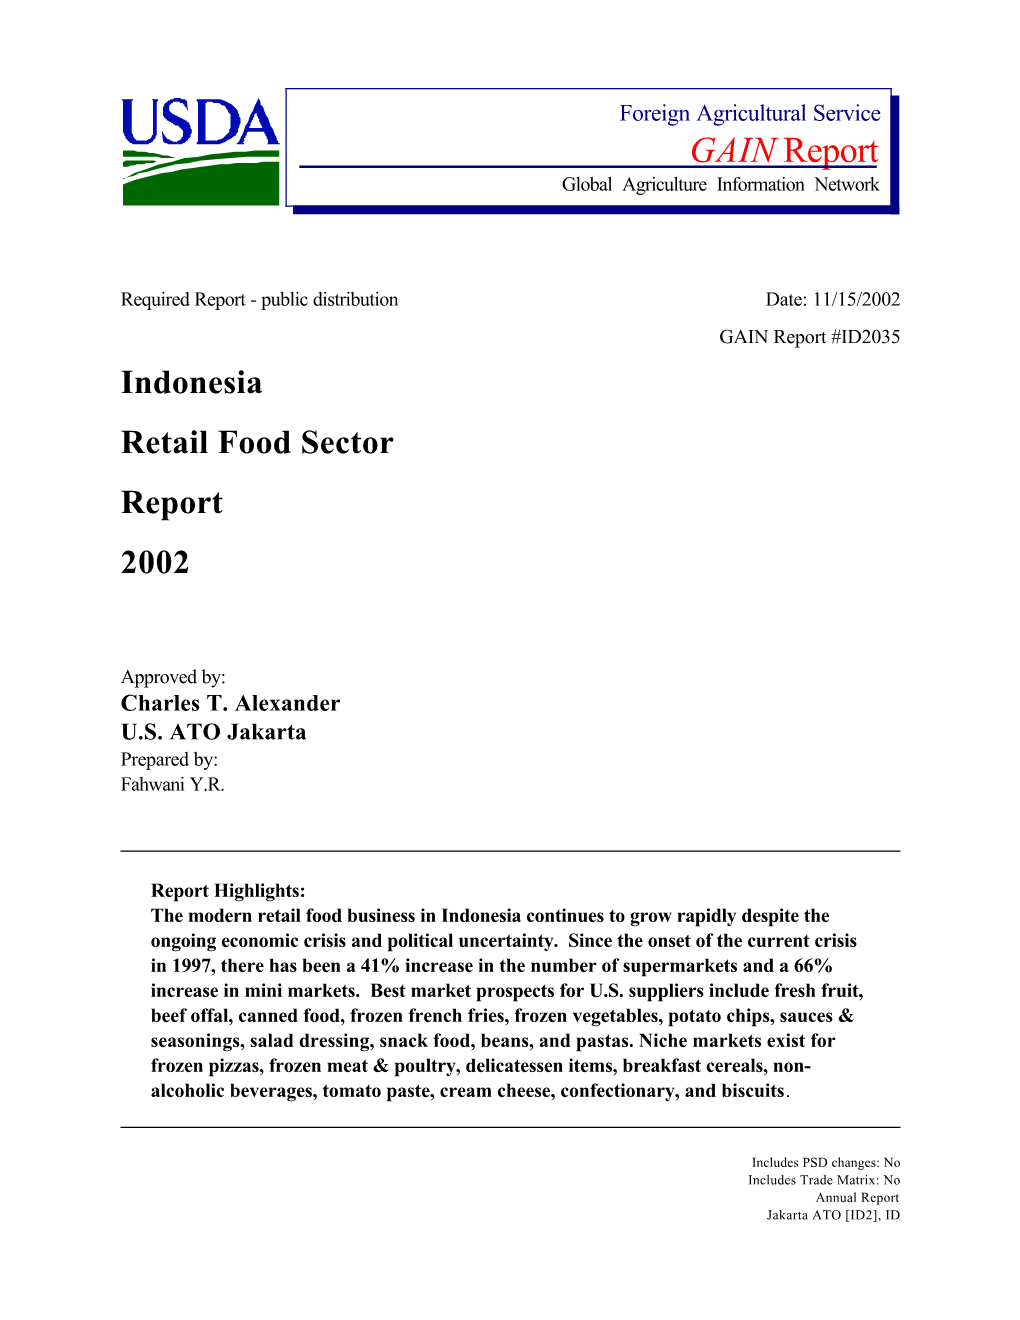 GAIN Report Global Agriculture Information Network